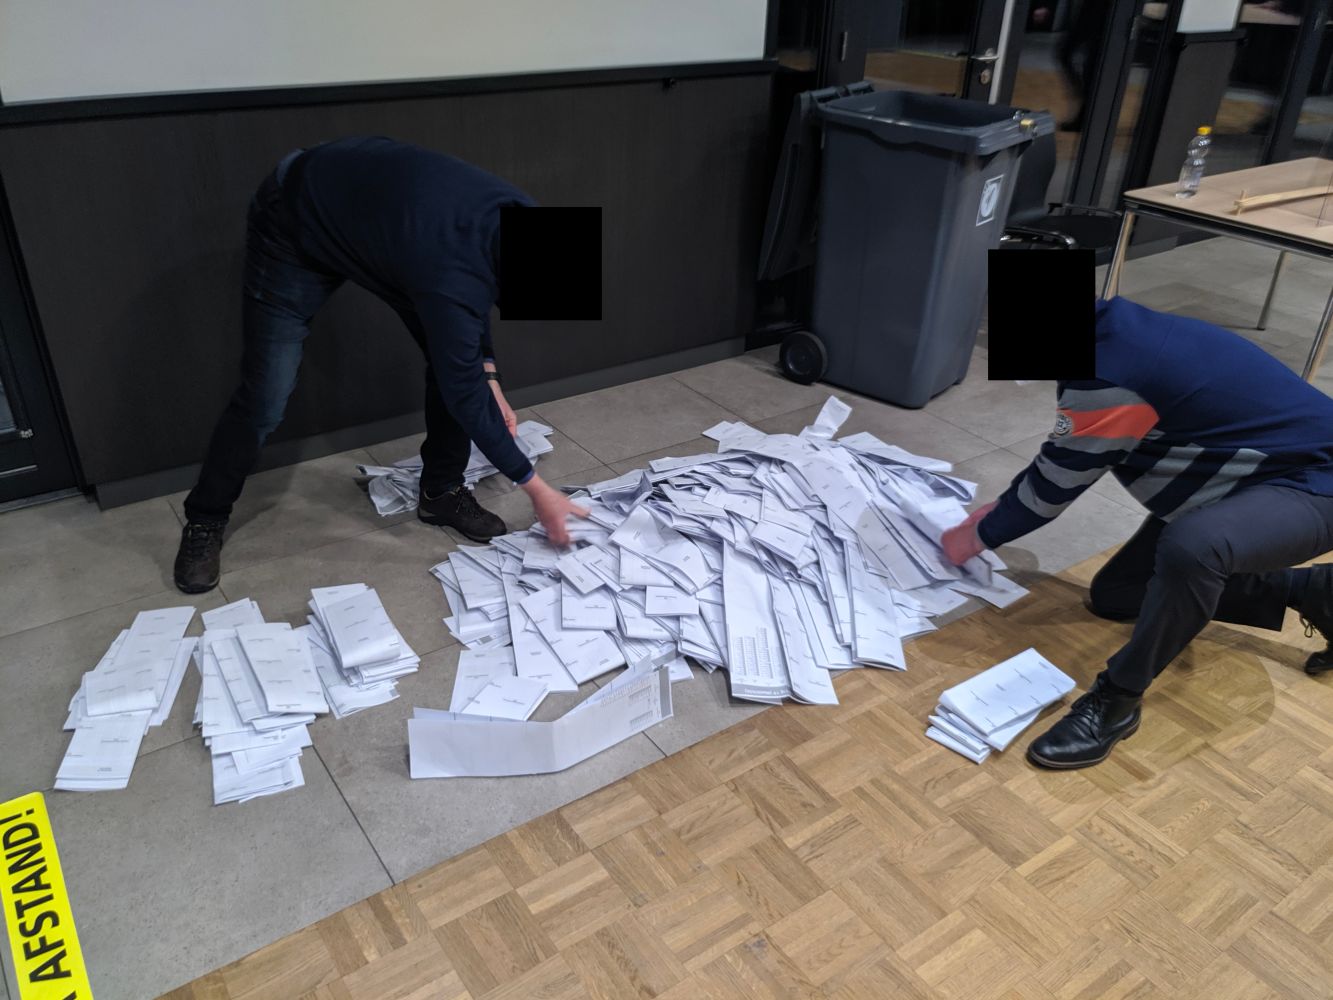 Polling station members creating stacks of ballots shortly after opening the ballot box